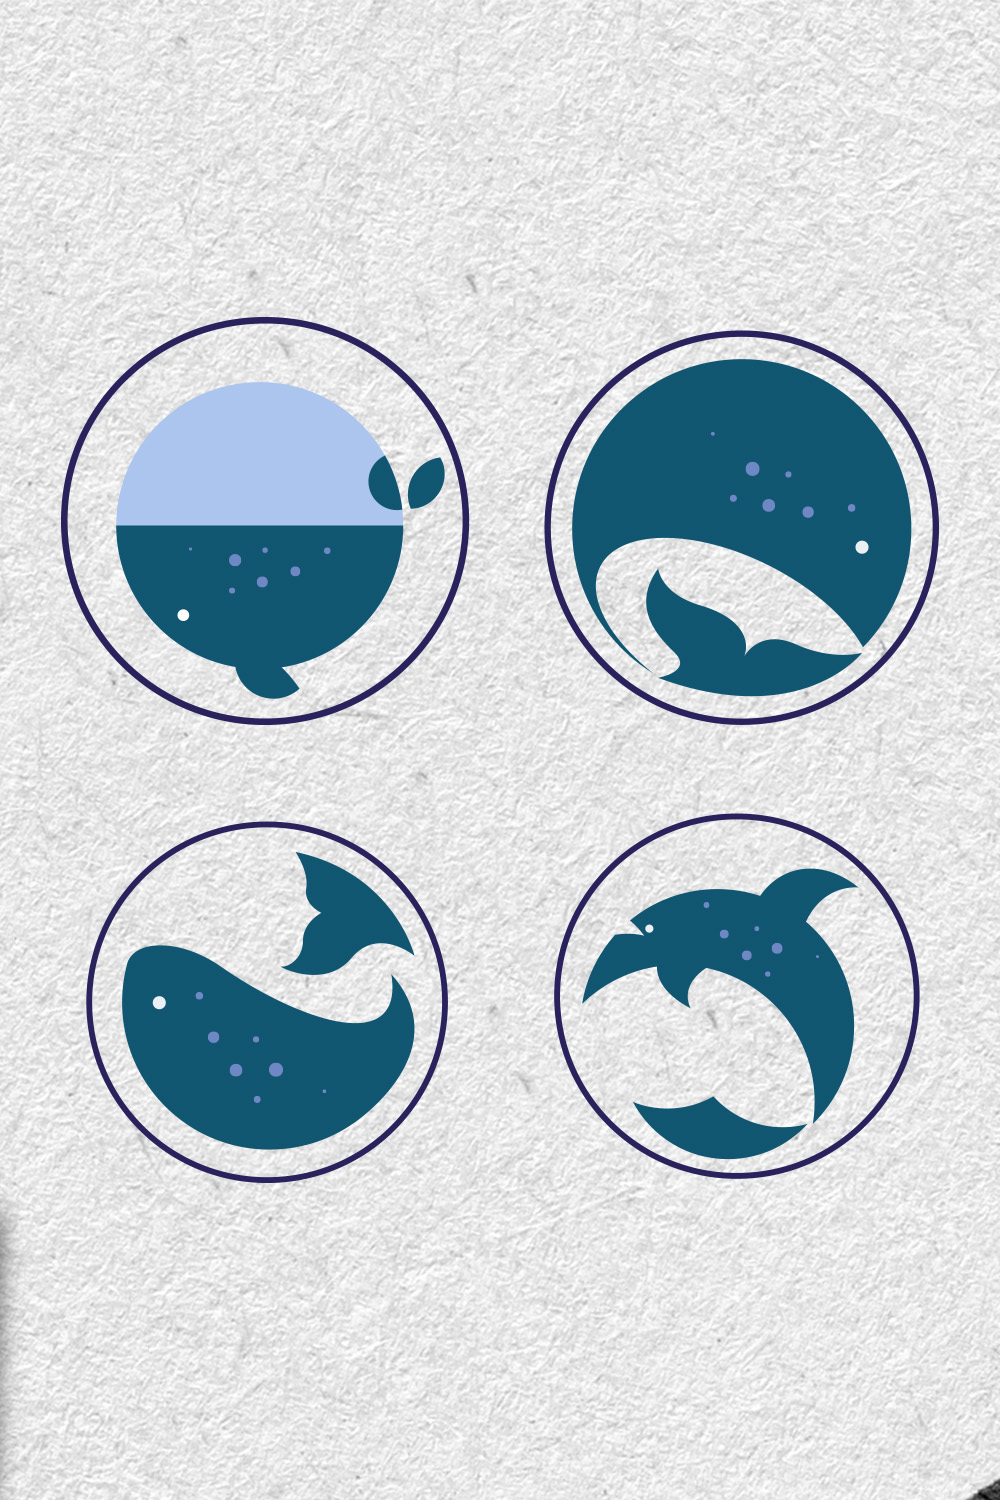 vector images of marine fish Set pinterest preview image.